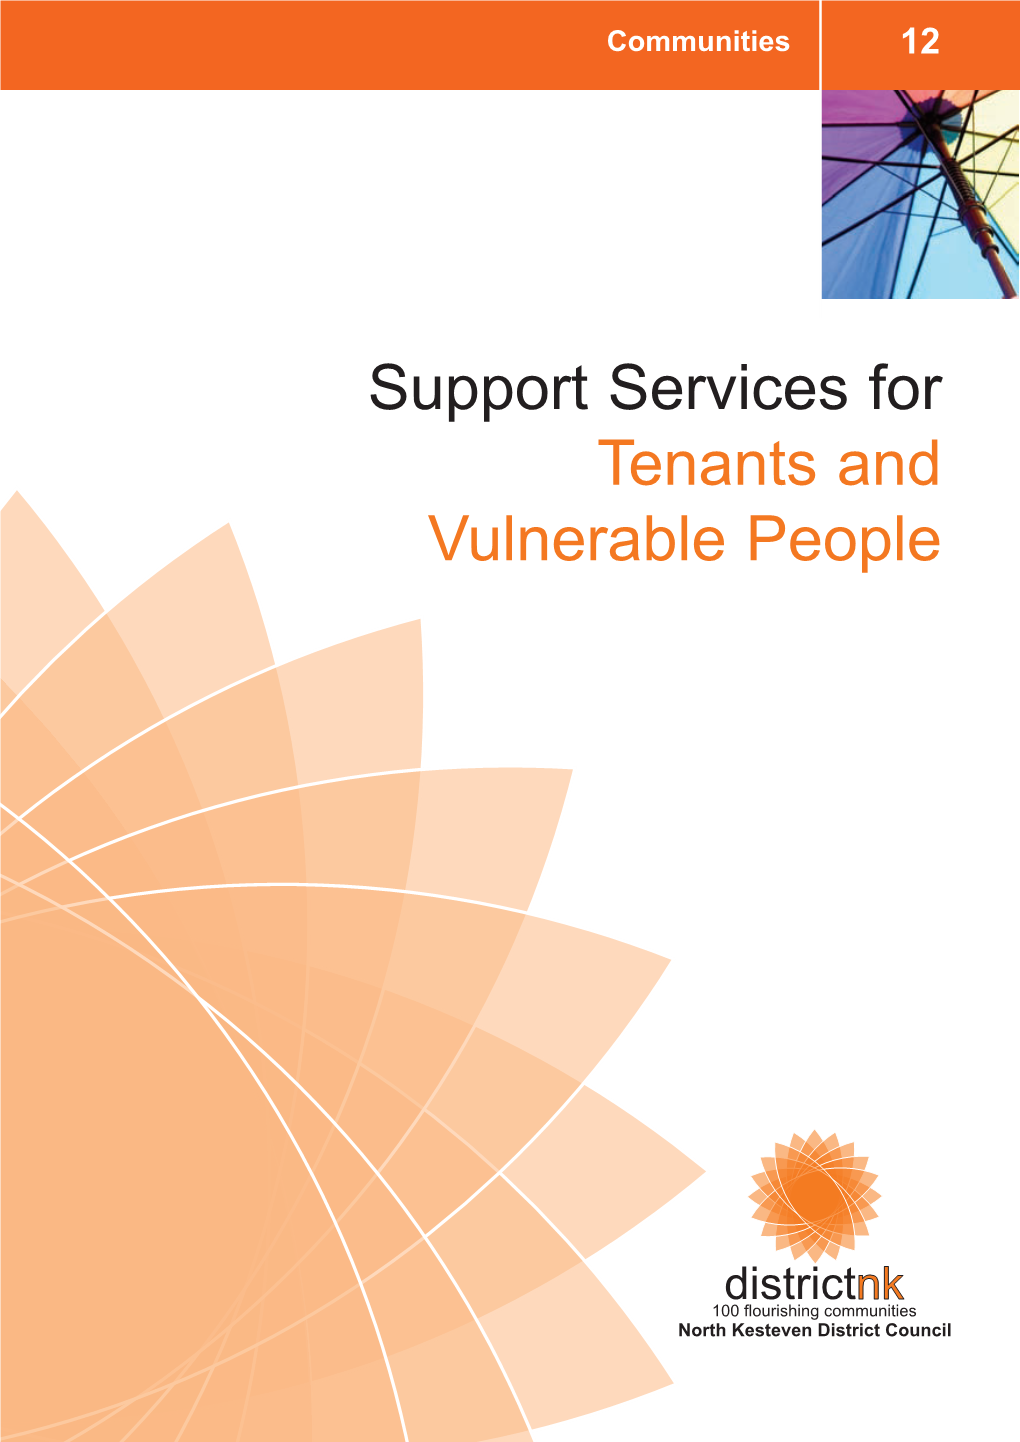 Support Services for Tenants and Vulnerable People